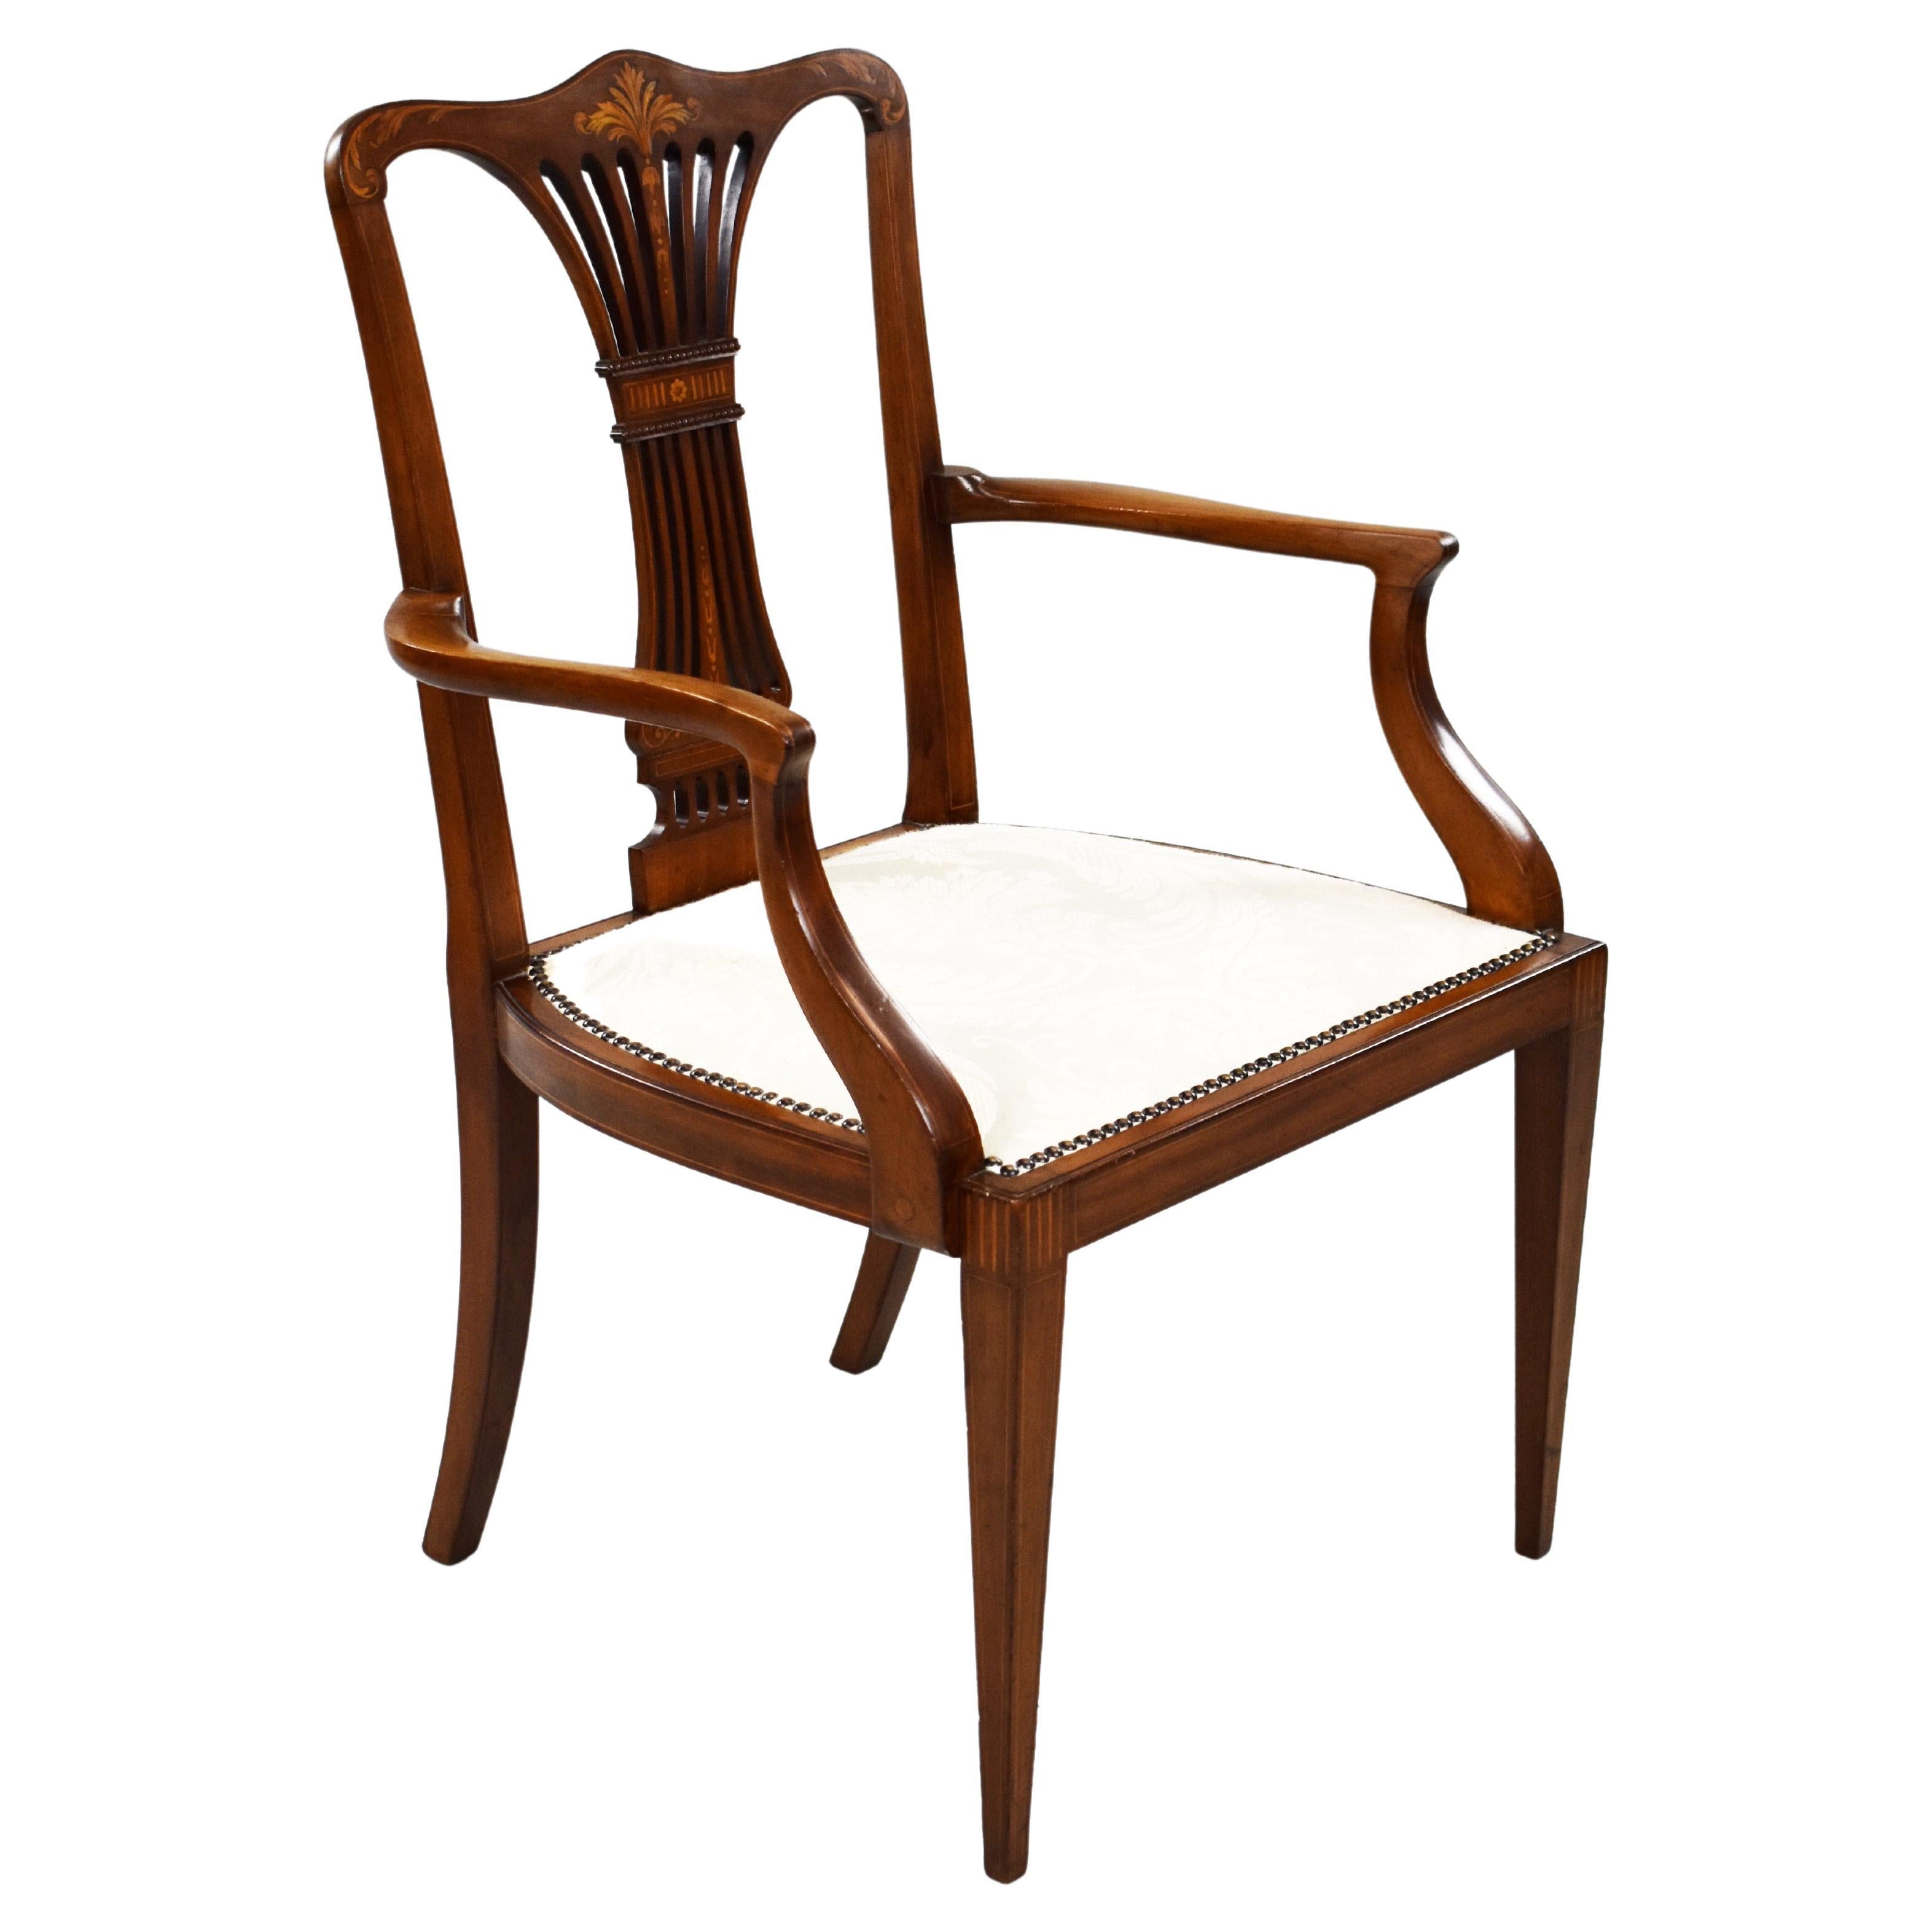 20th Century English Edwardian Inlaid Open Armchair For Sale